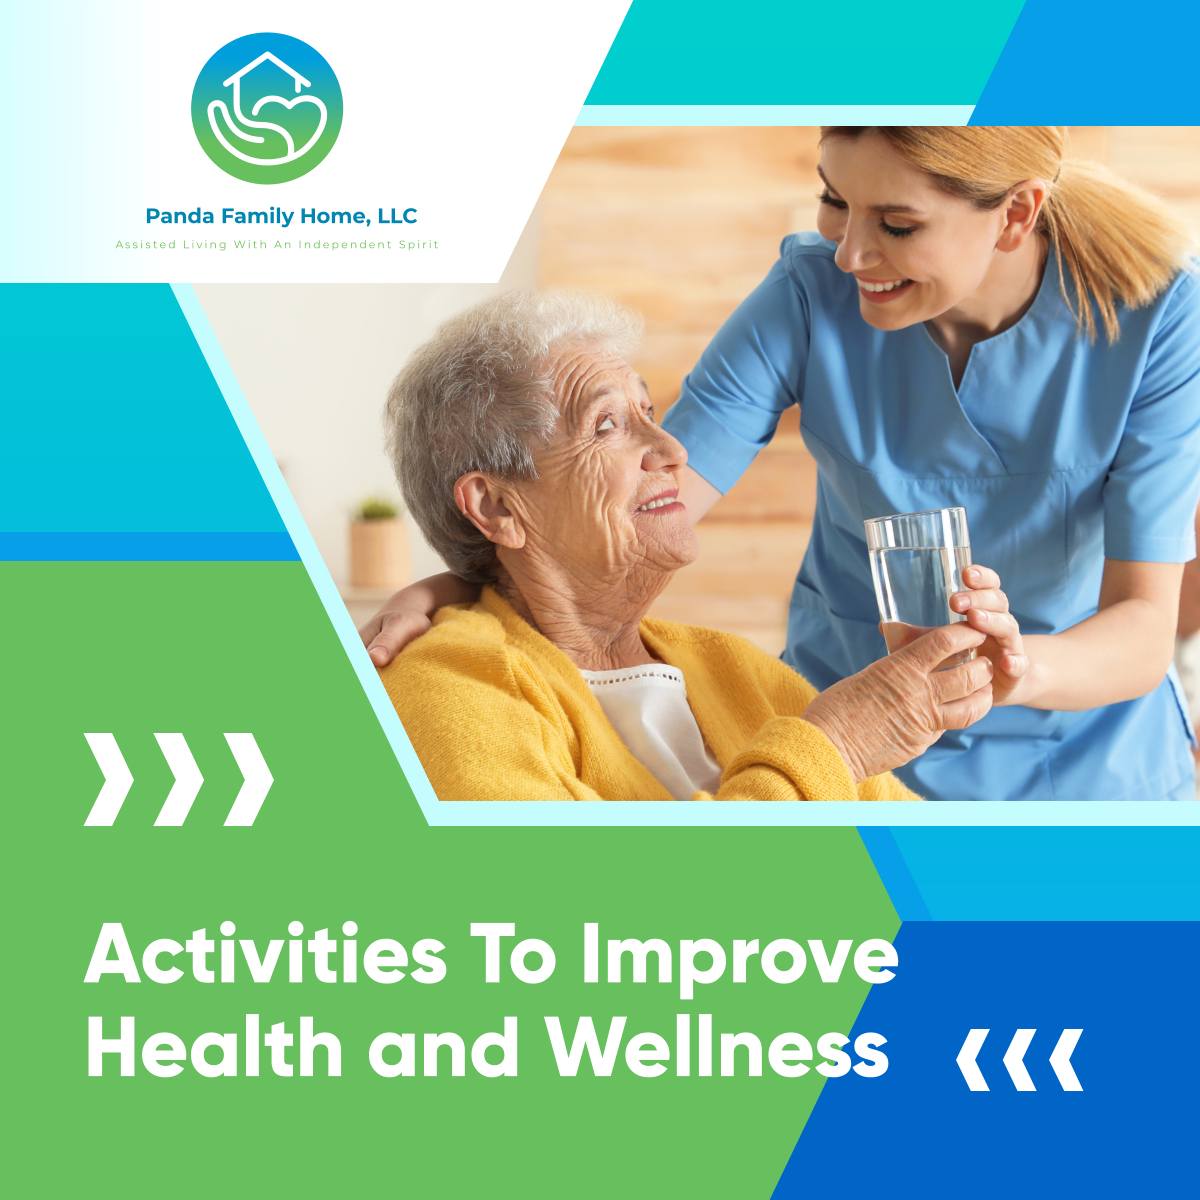 Here are some activities that can help you and your loved one improve their overall health and wellness:

- Develop a healthy sleep cycle

- Stay hydrated

- Avoid inactivity, especially for long periods

- Follow healthy eating practices

#ImprovingHealth #AssistedLivingFacility